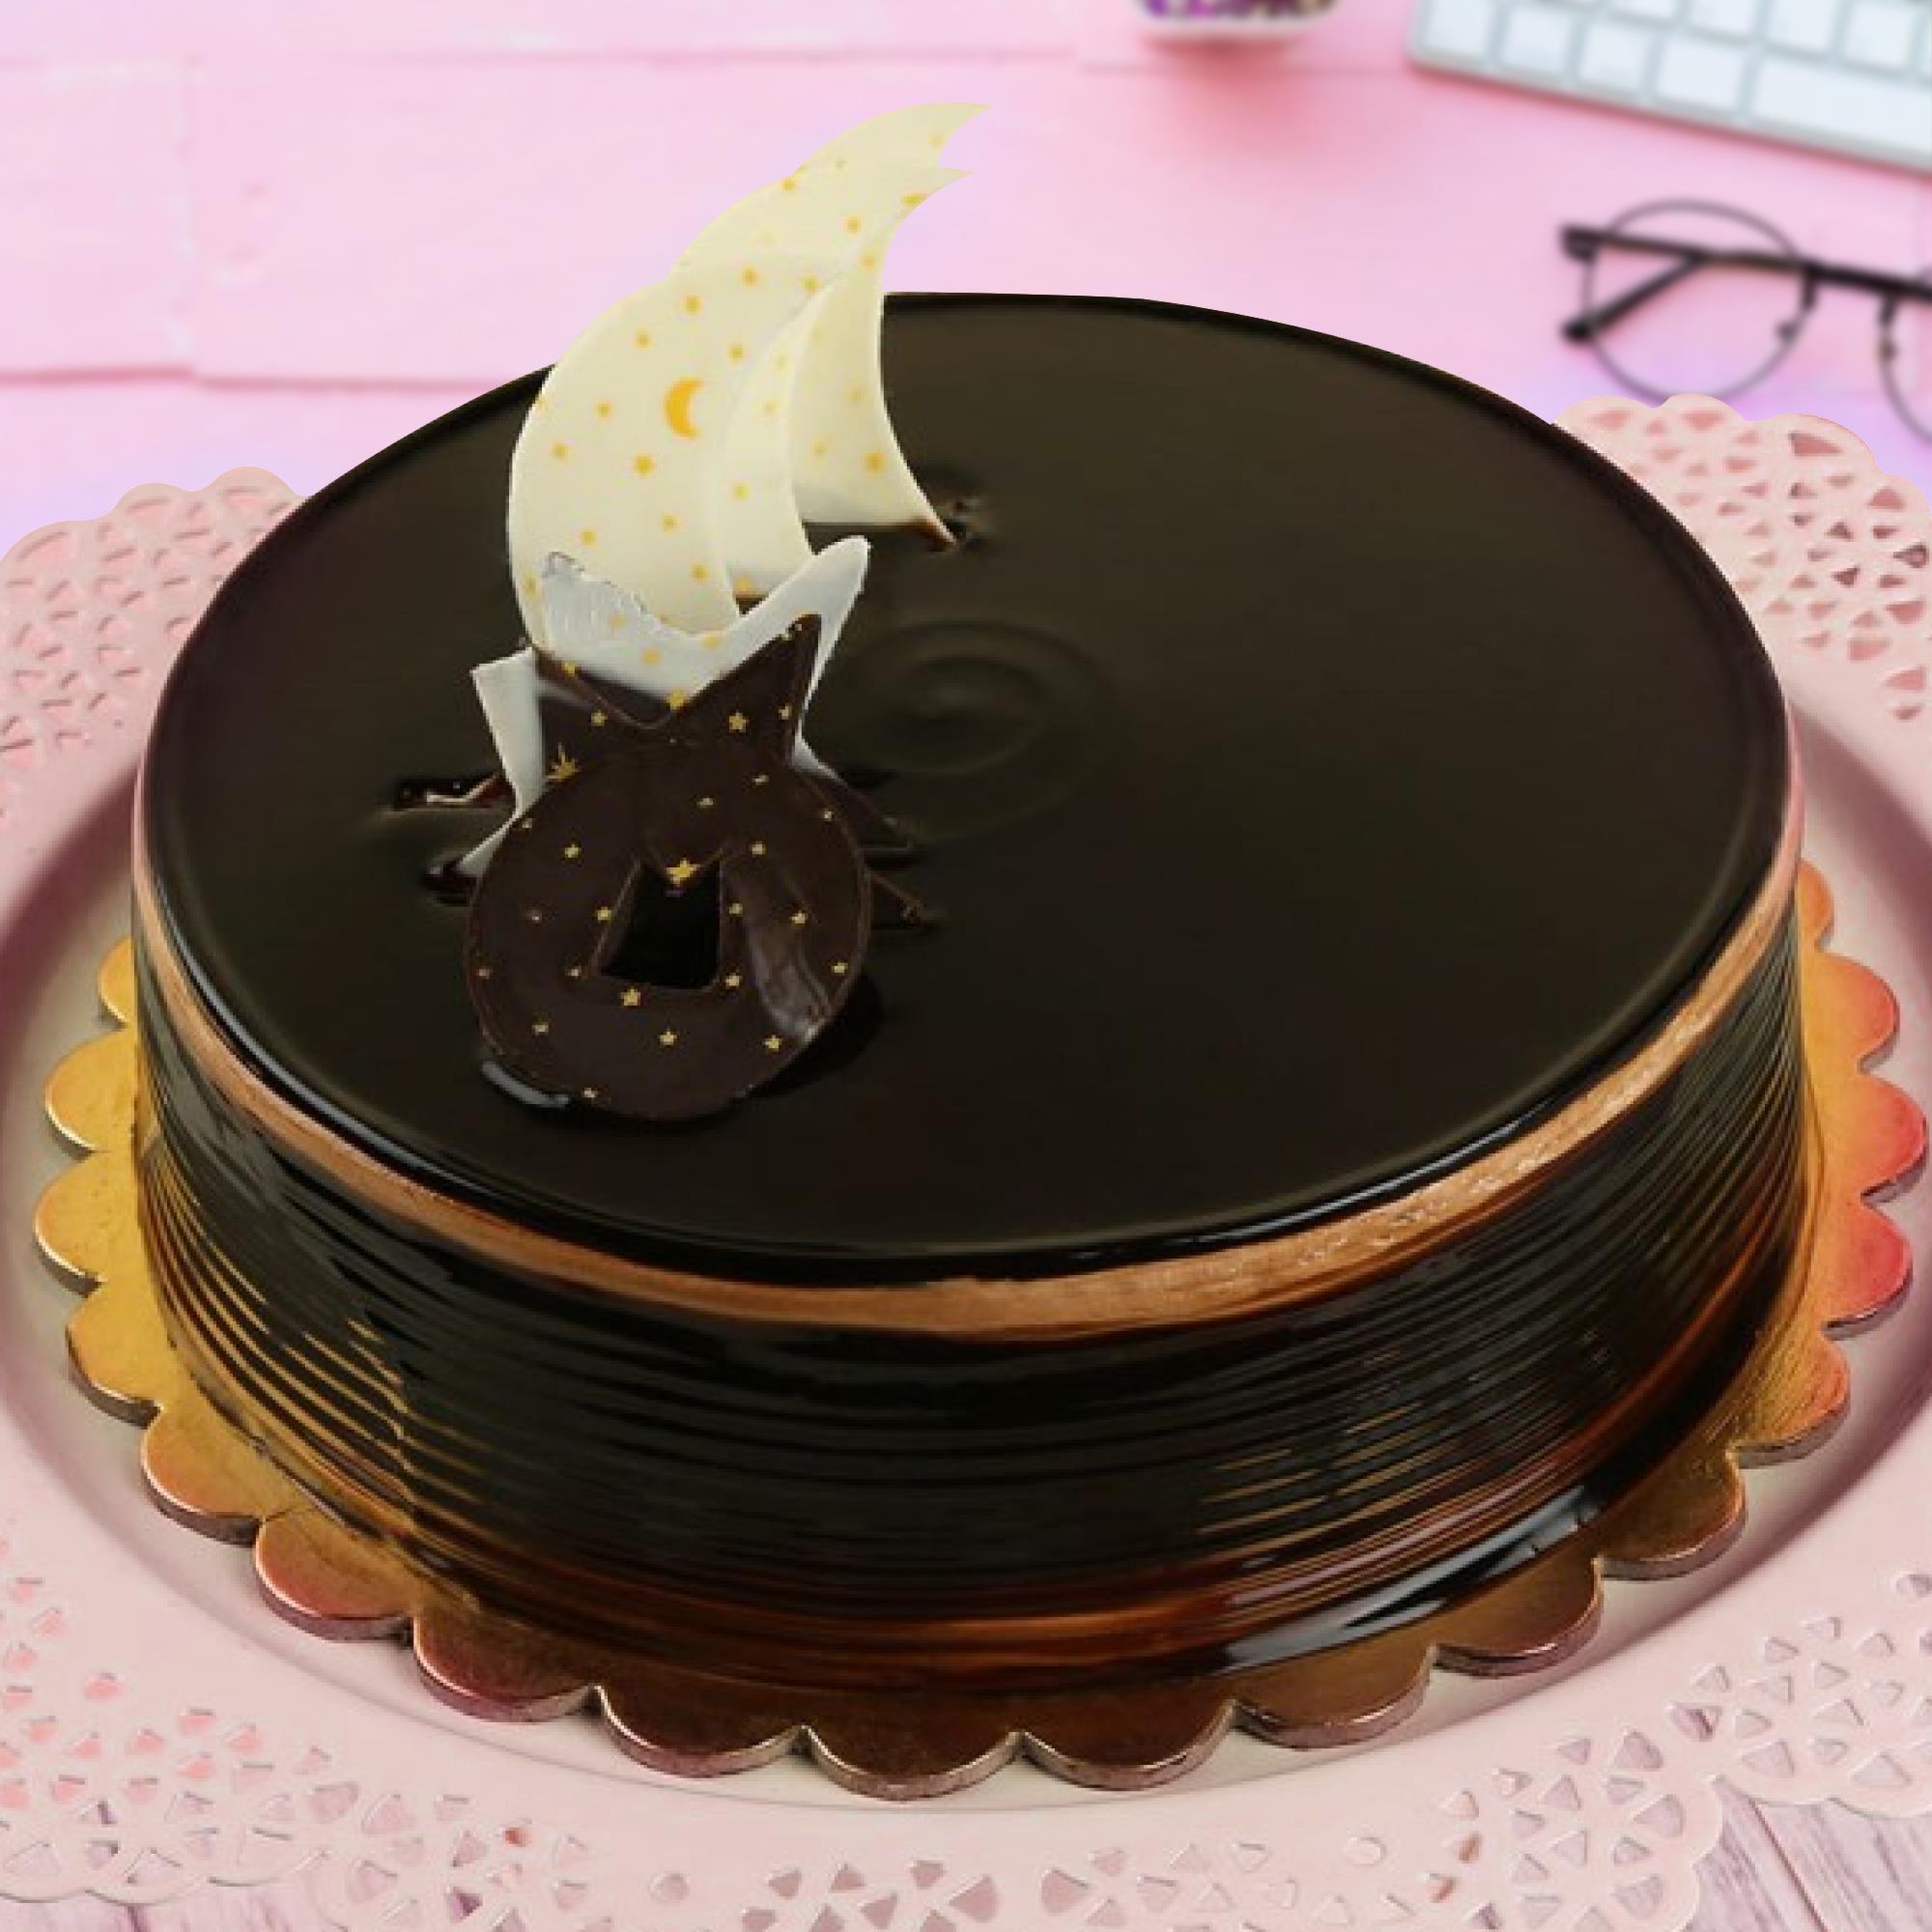 Send cakes online,online birthday cake delivery in Bangalore, Pune and  India. Cash on delivery available. Flower Delivery(india) send Eggless cakes  to Pune,send Eggless cakes to Mumbai,Delhi,India